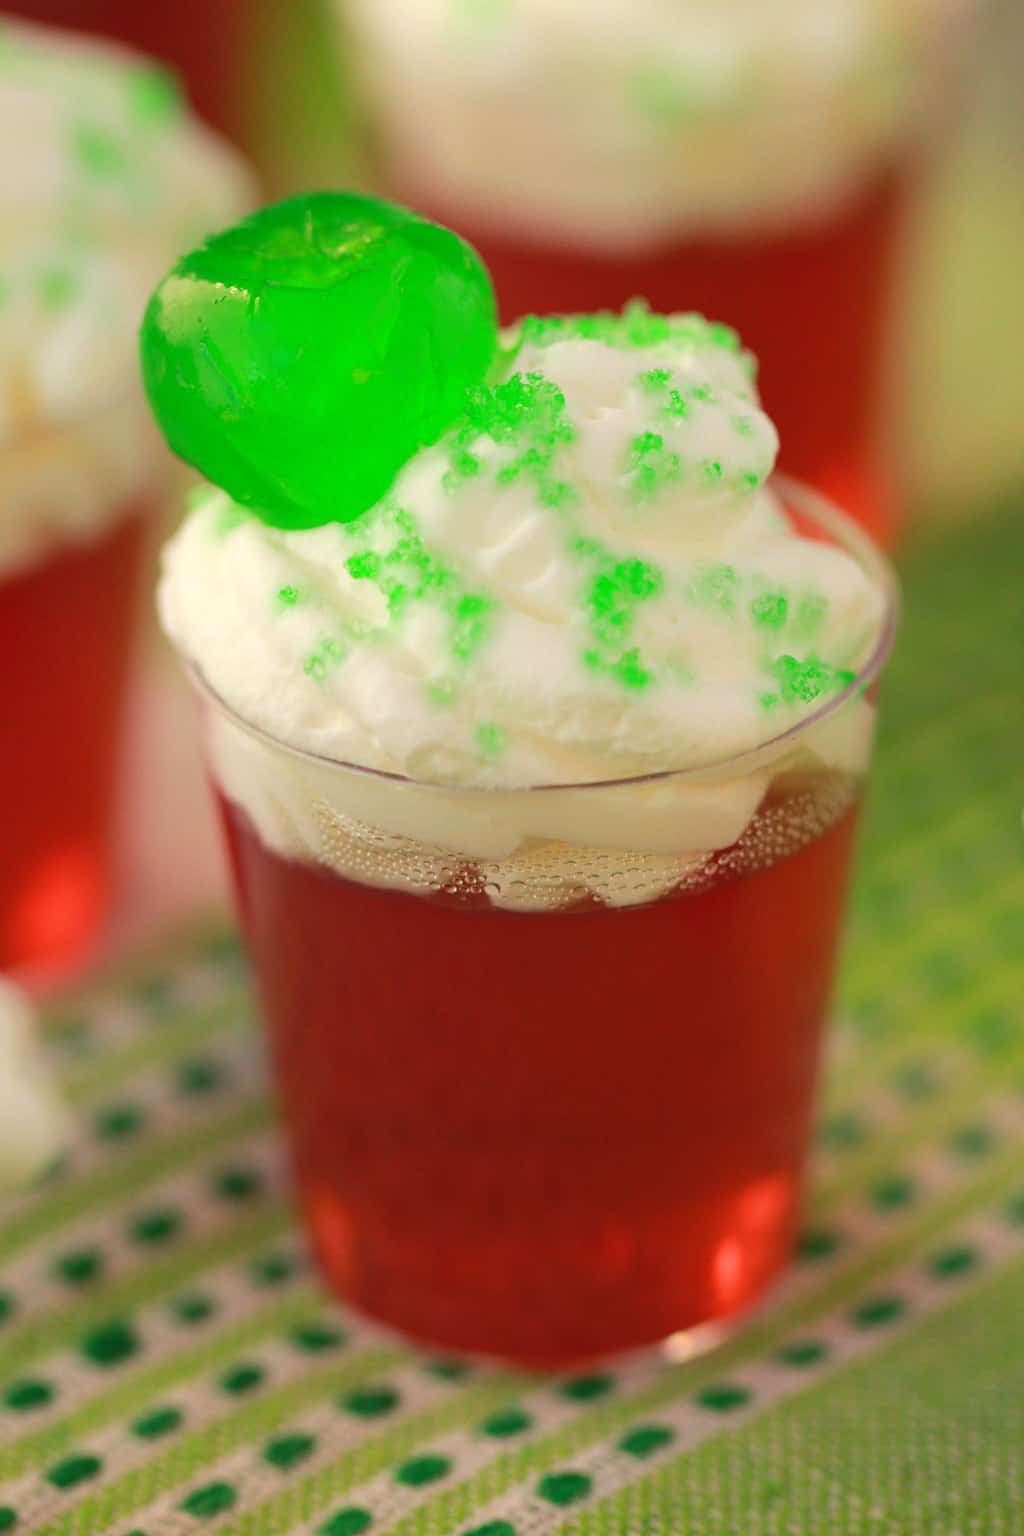 Vegan jello shots topped with vegan whipped cream, green sanding sugar and a green cherry. 